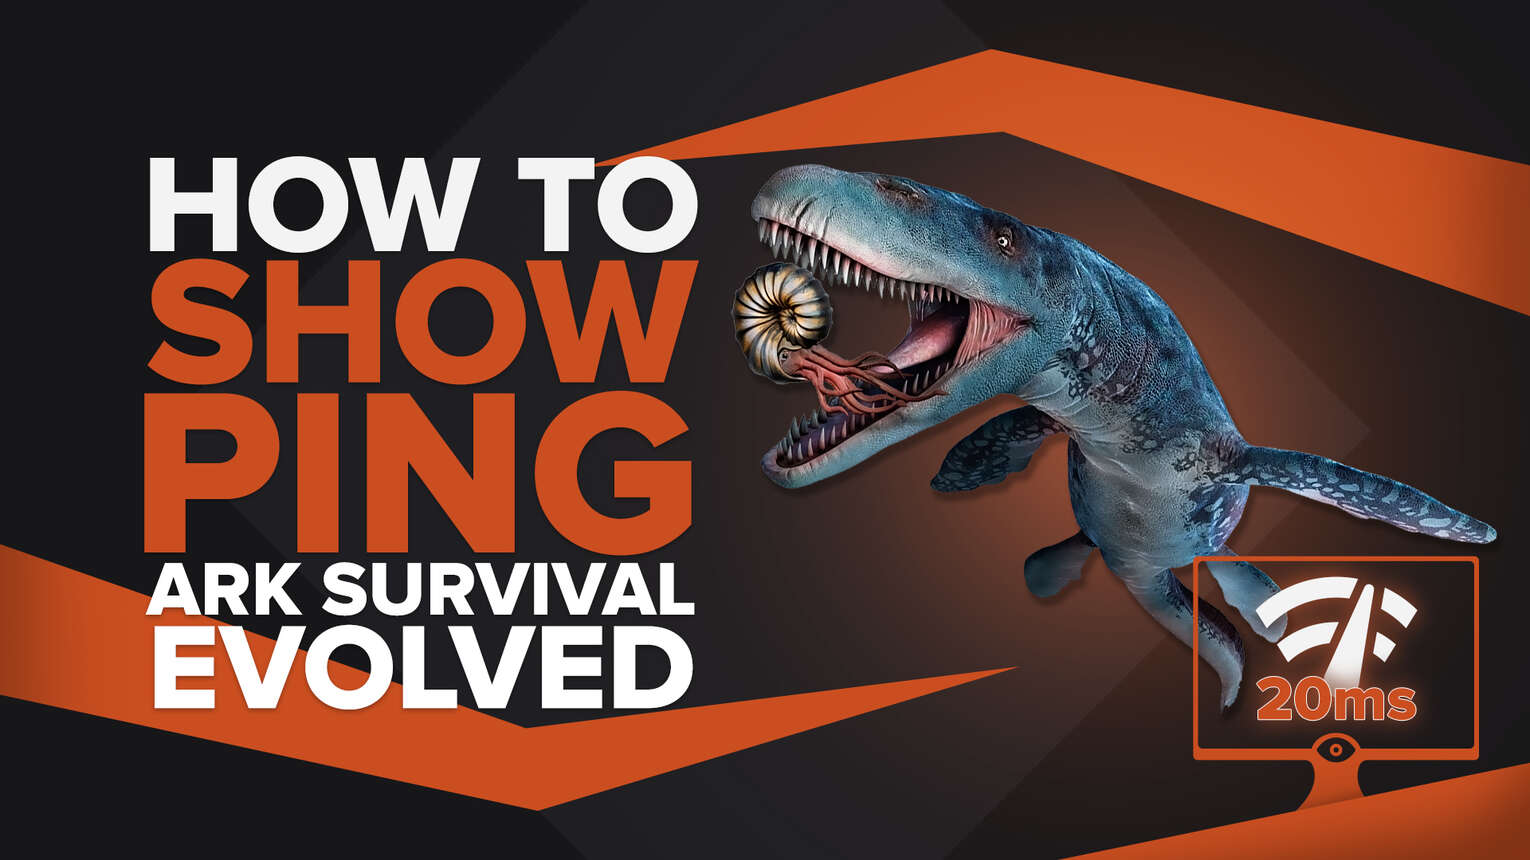 How to show your Ping in ARK with a few clicks